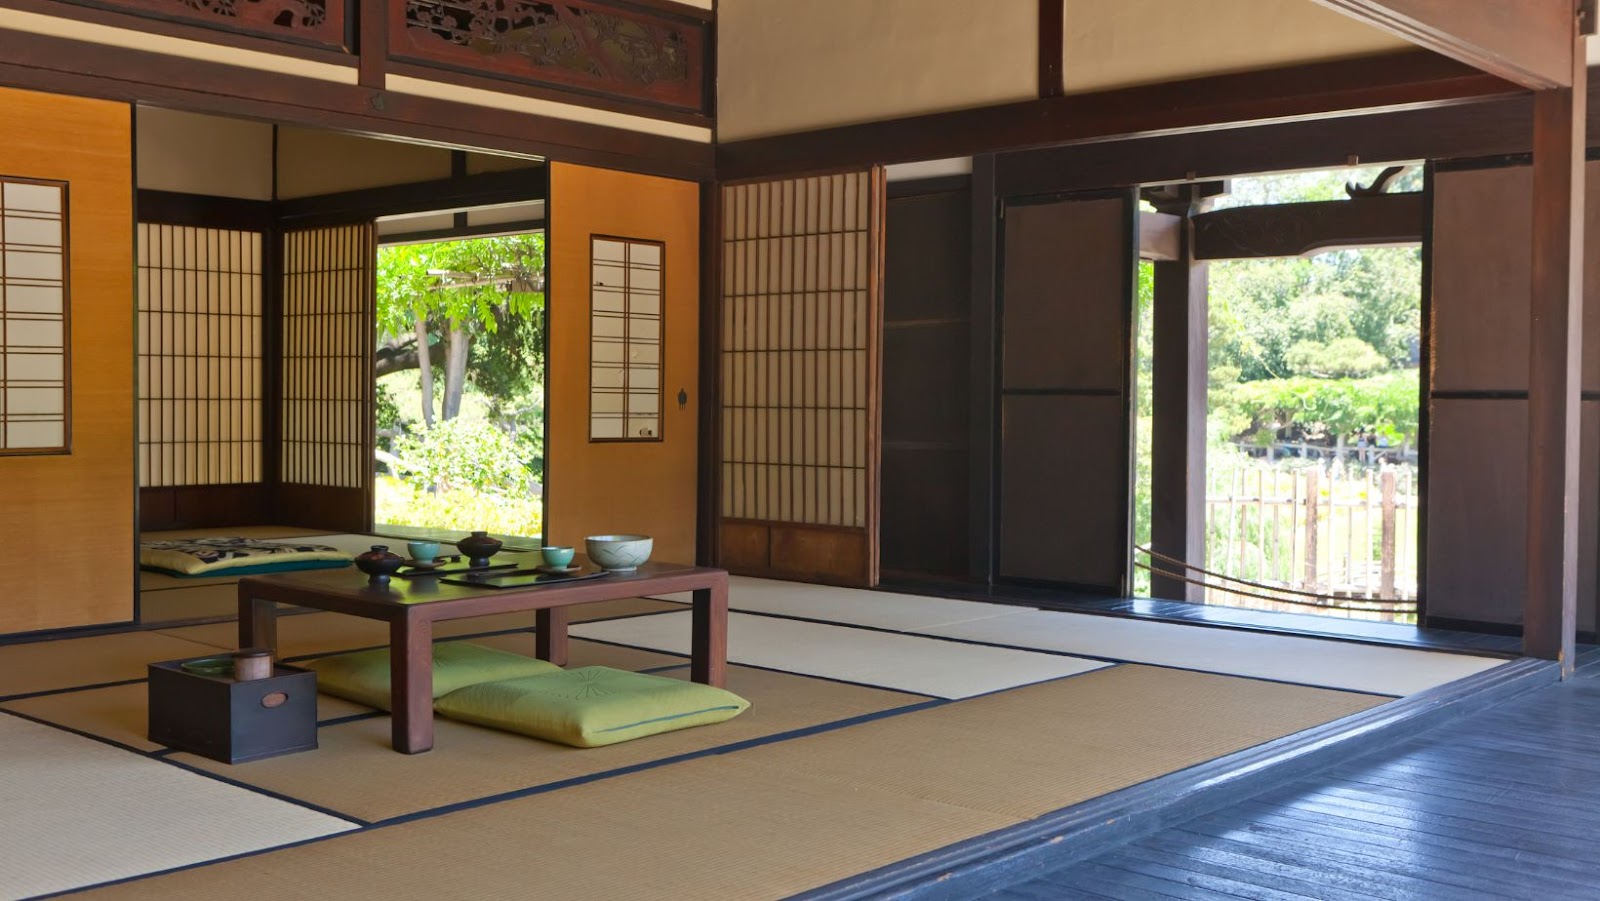 What Factors Affect The Cost of a Japanese House?